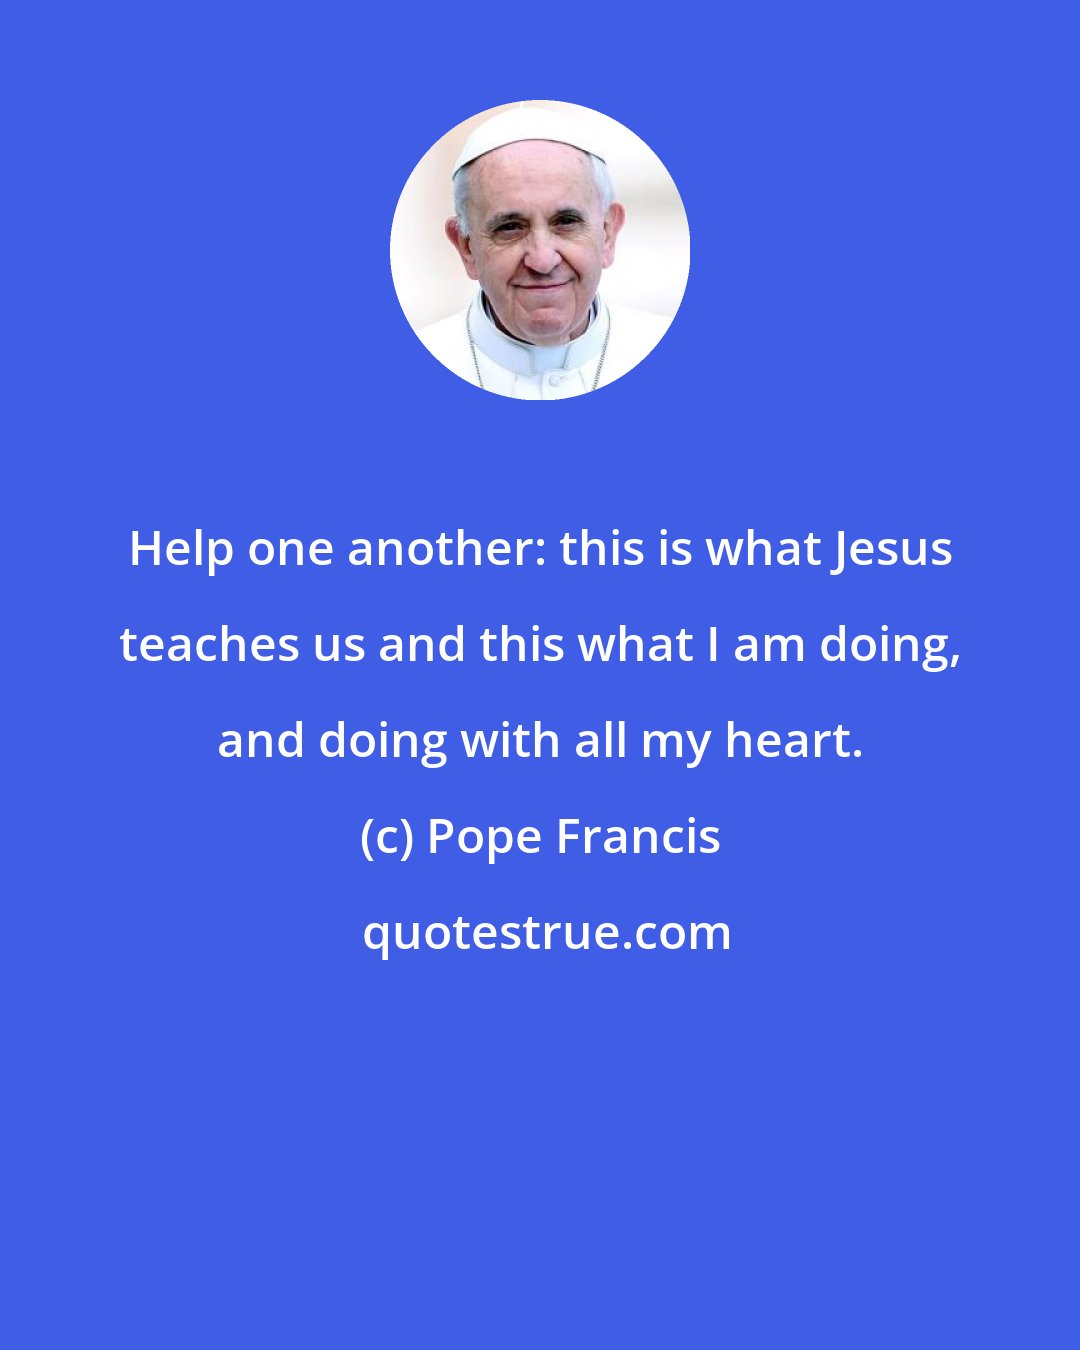 Pope Francis: Help one another: this is what Jesus teaches us and this what I am doing, and doing with all my heart.